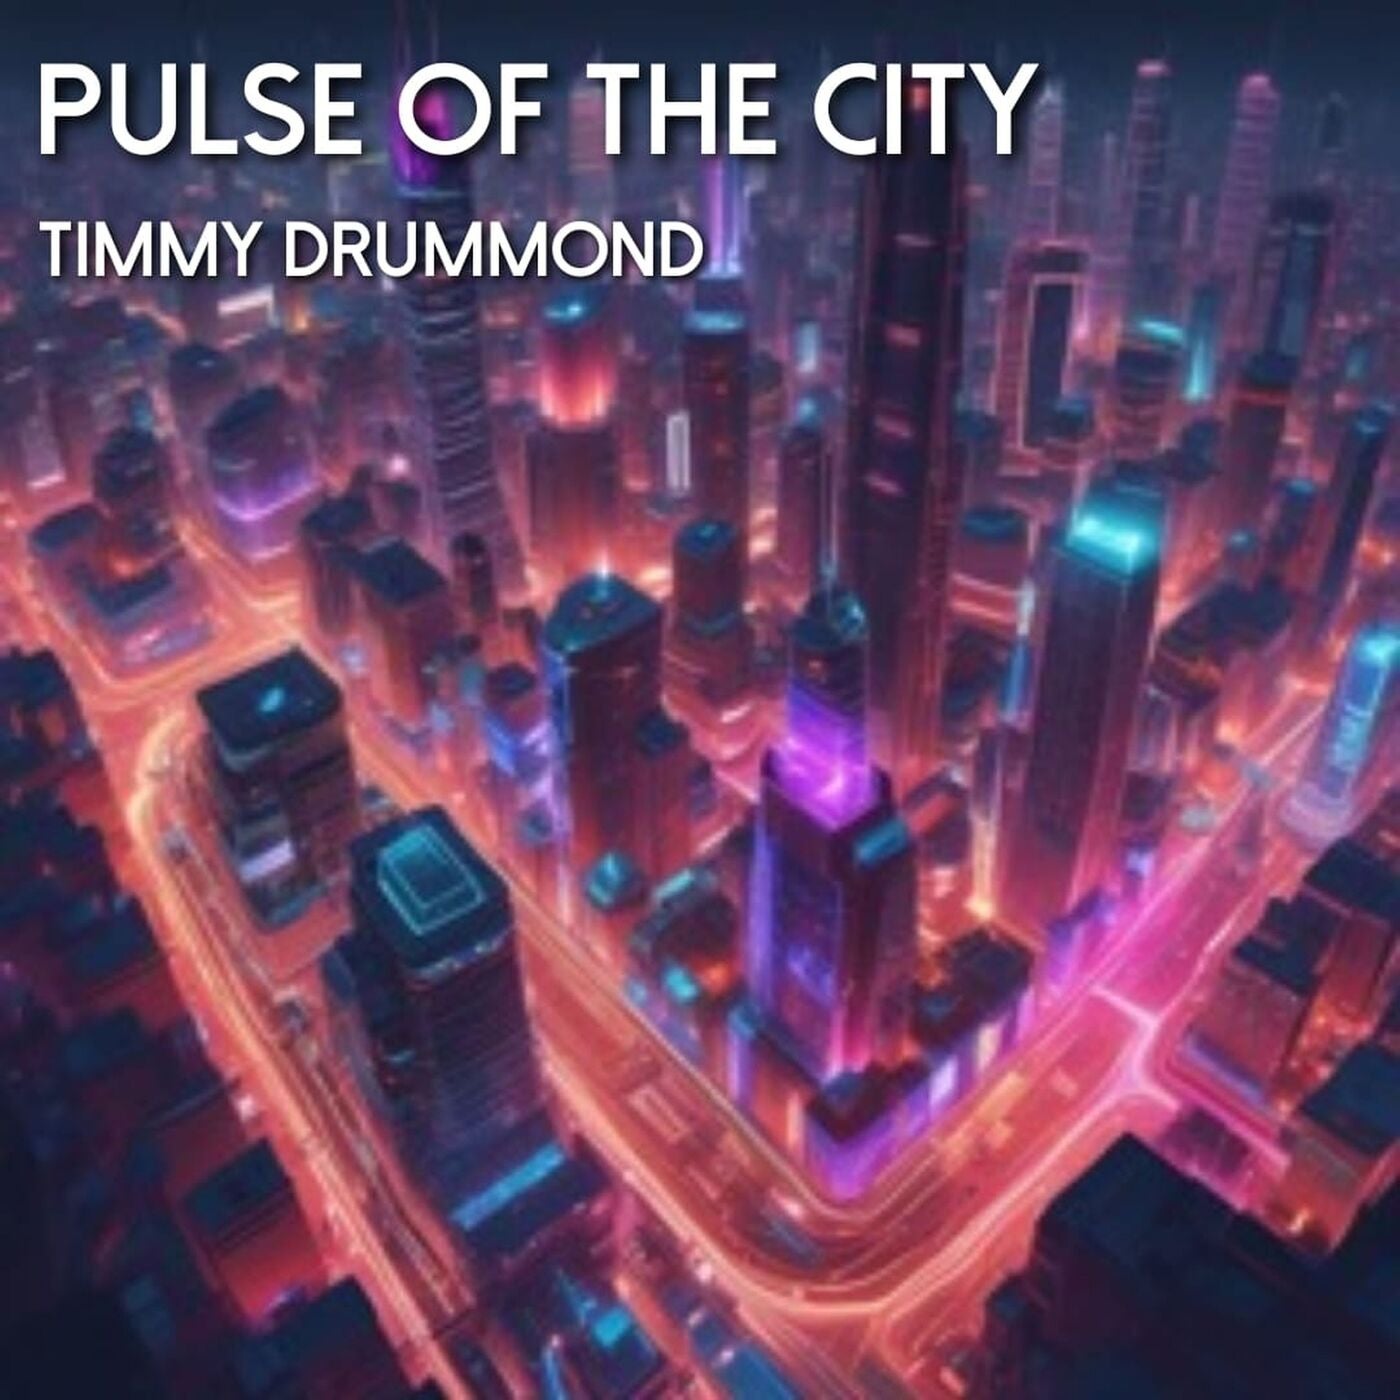 Pulse of the City